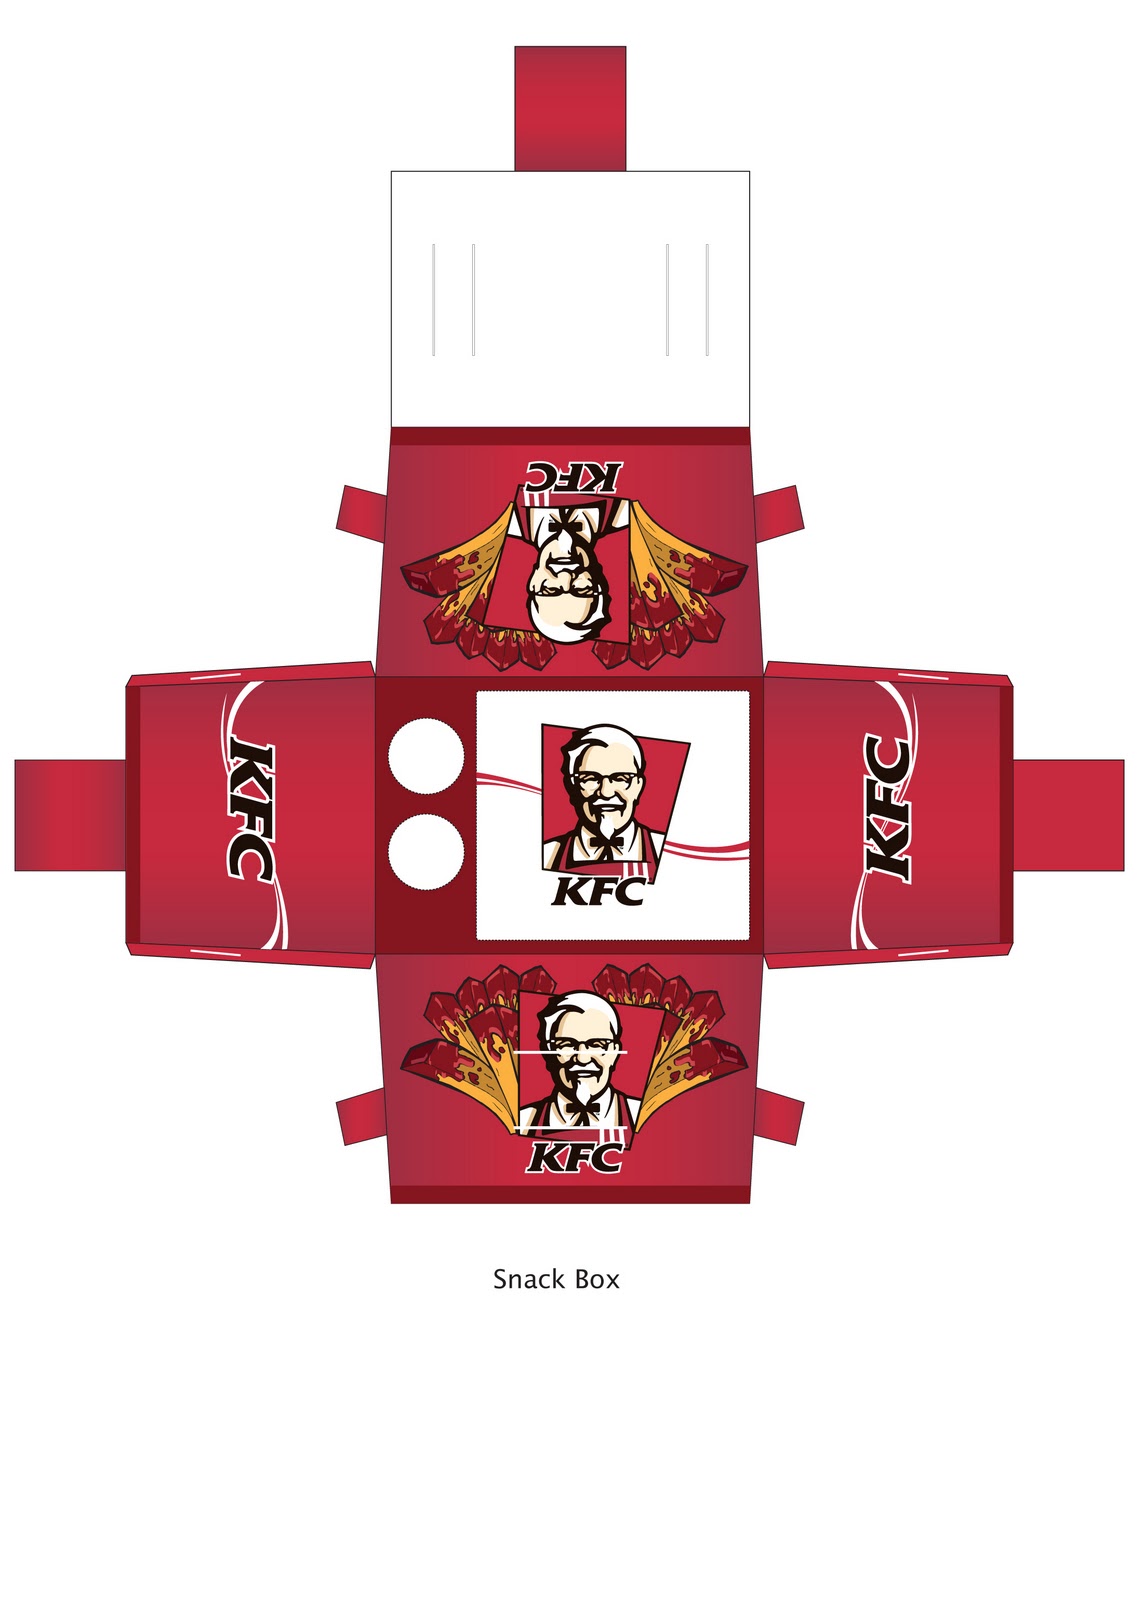 Ntethelelo's Portfolio: packaging project for KFC and Arthritis medication